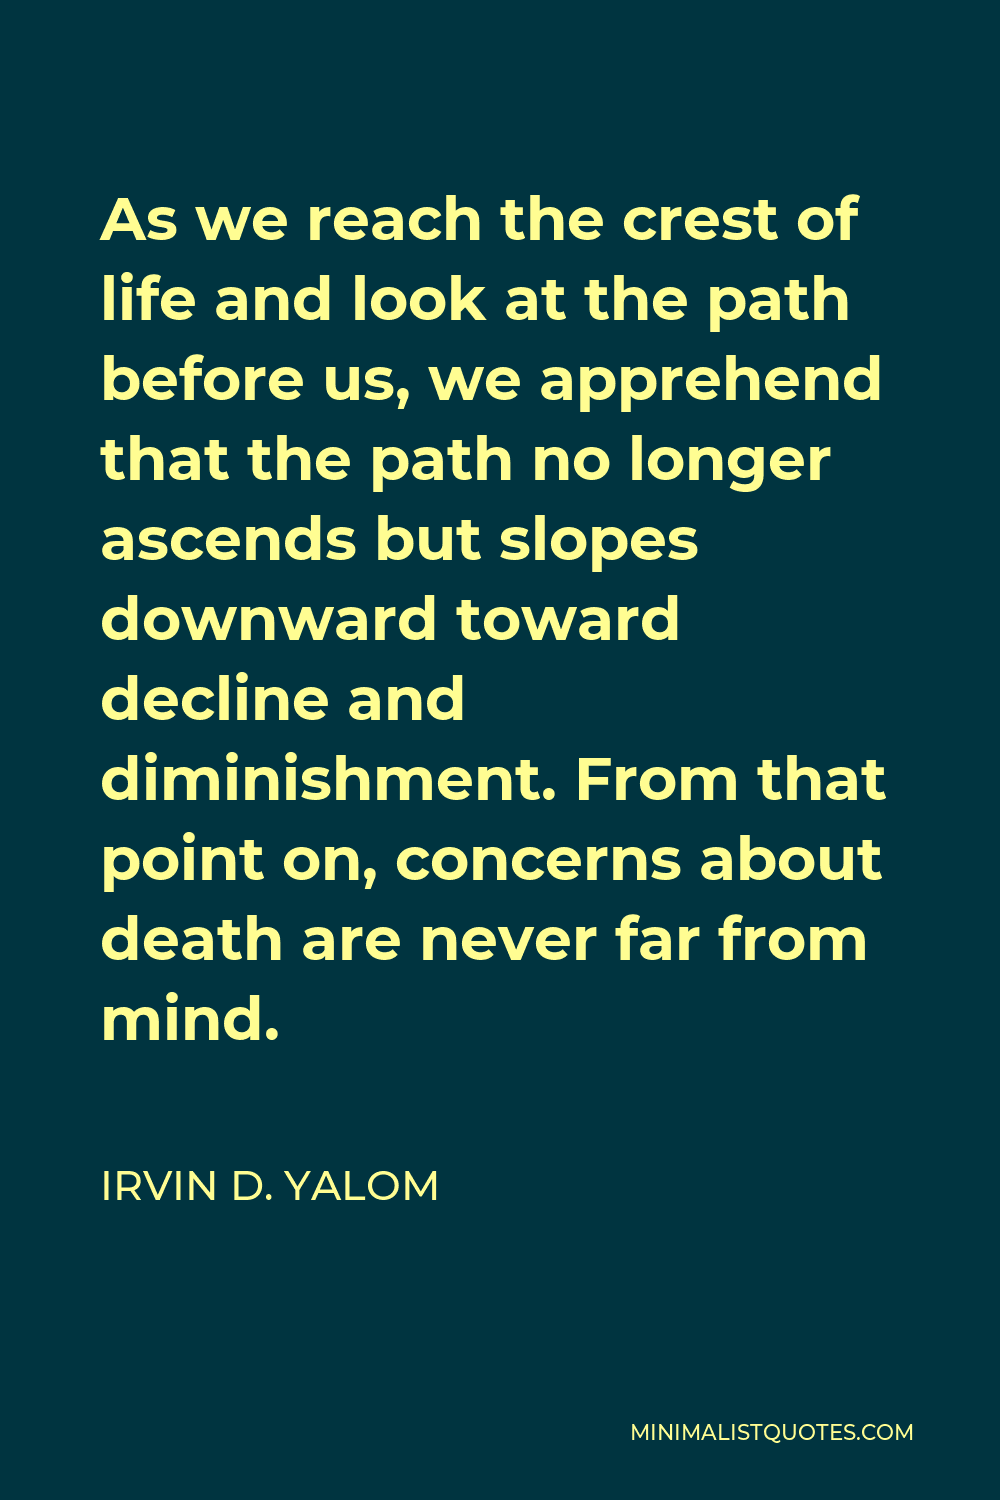 Irvin D. Yalom Quote - As we reach the crest of life and look at the path before us, we apprehend that the path no longer ascends but slopes downward toward decline and diminishment. From that point on, concerns about death are never far from mind.